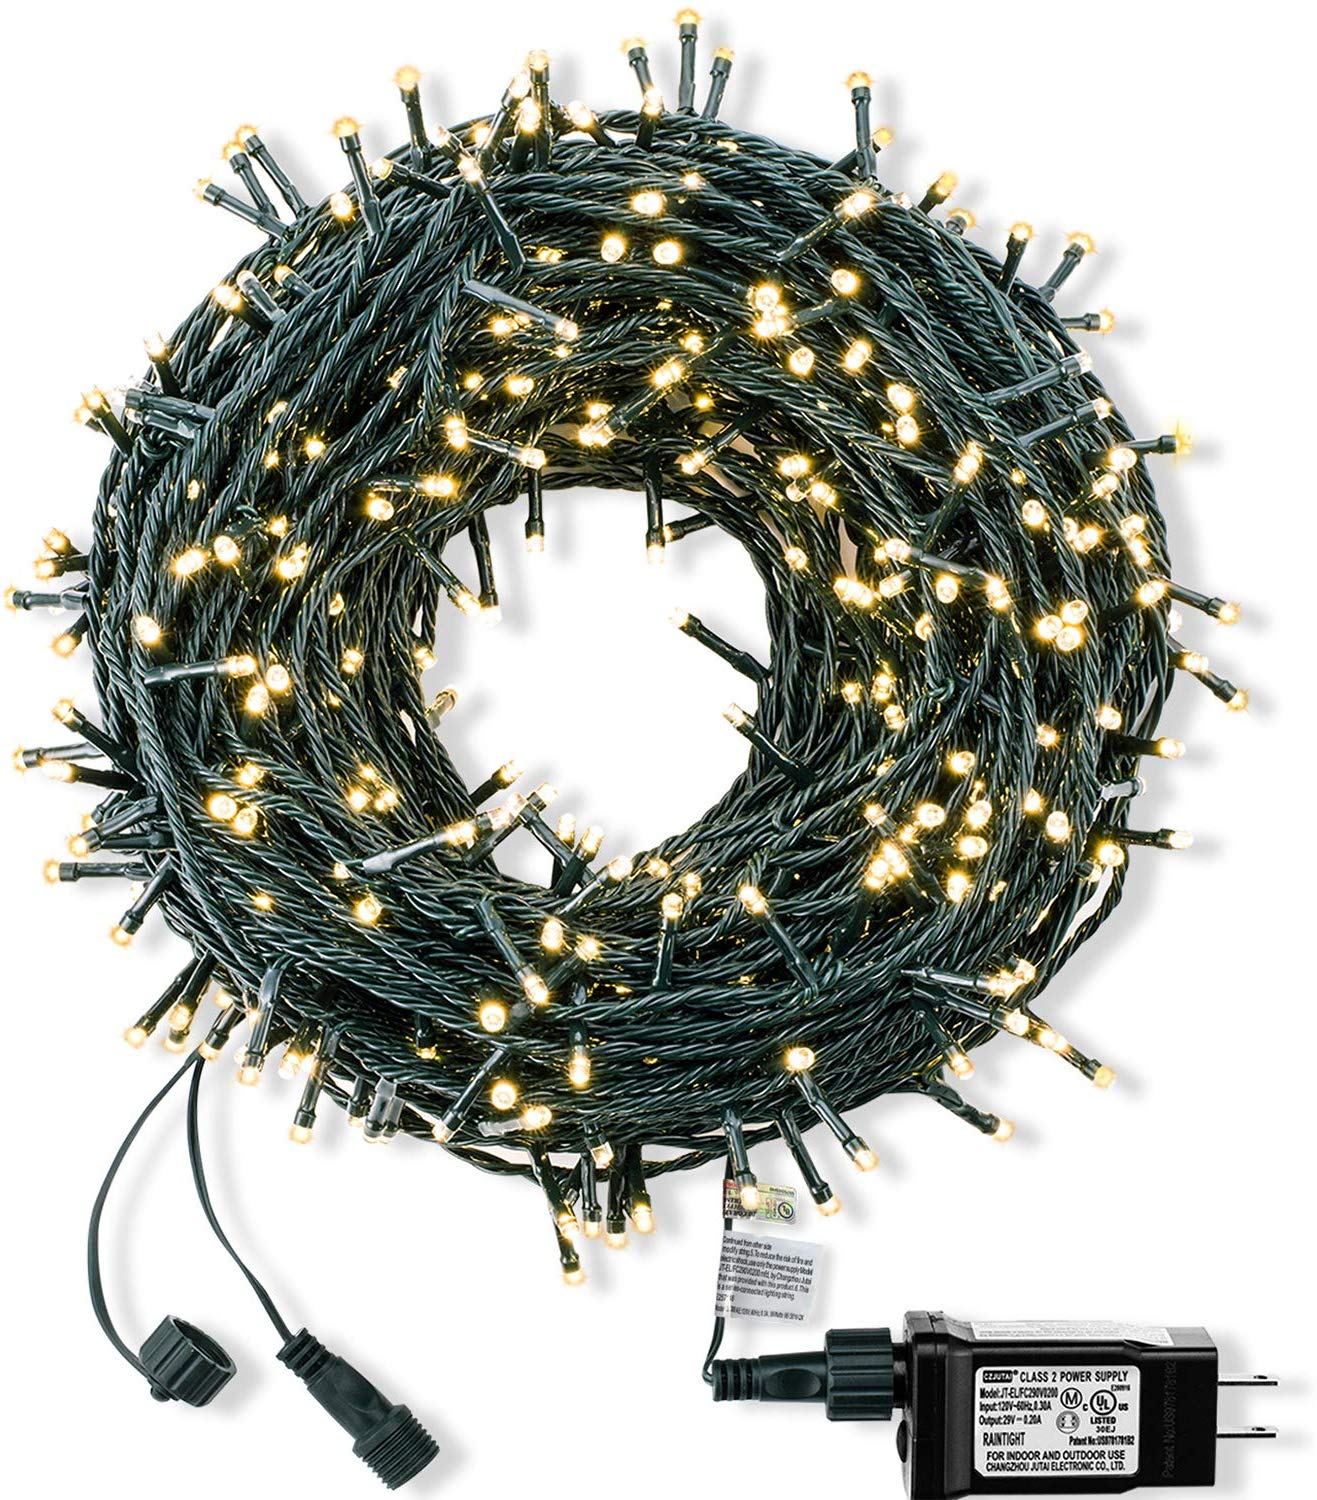 ROYAMY Outdoor Christmas String Lights